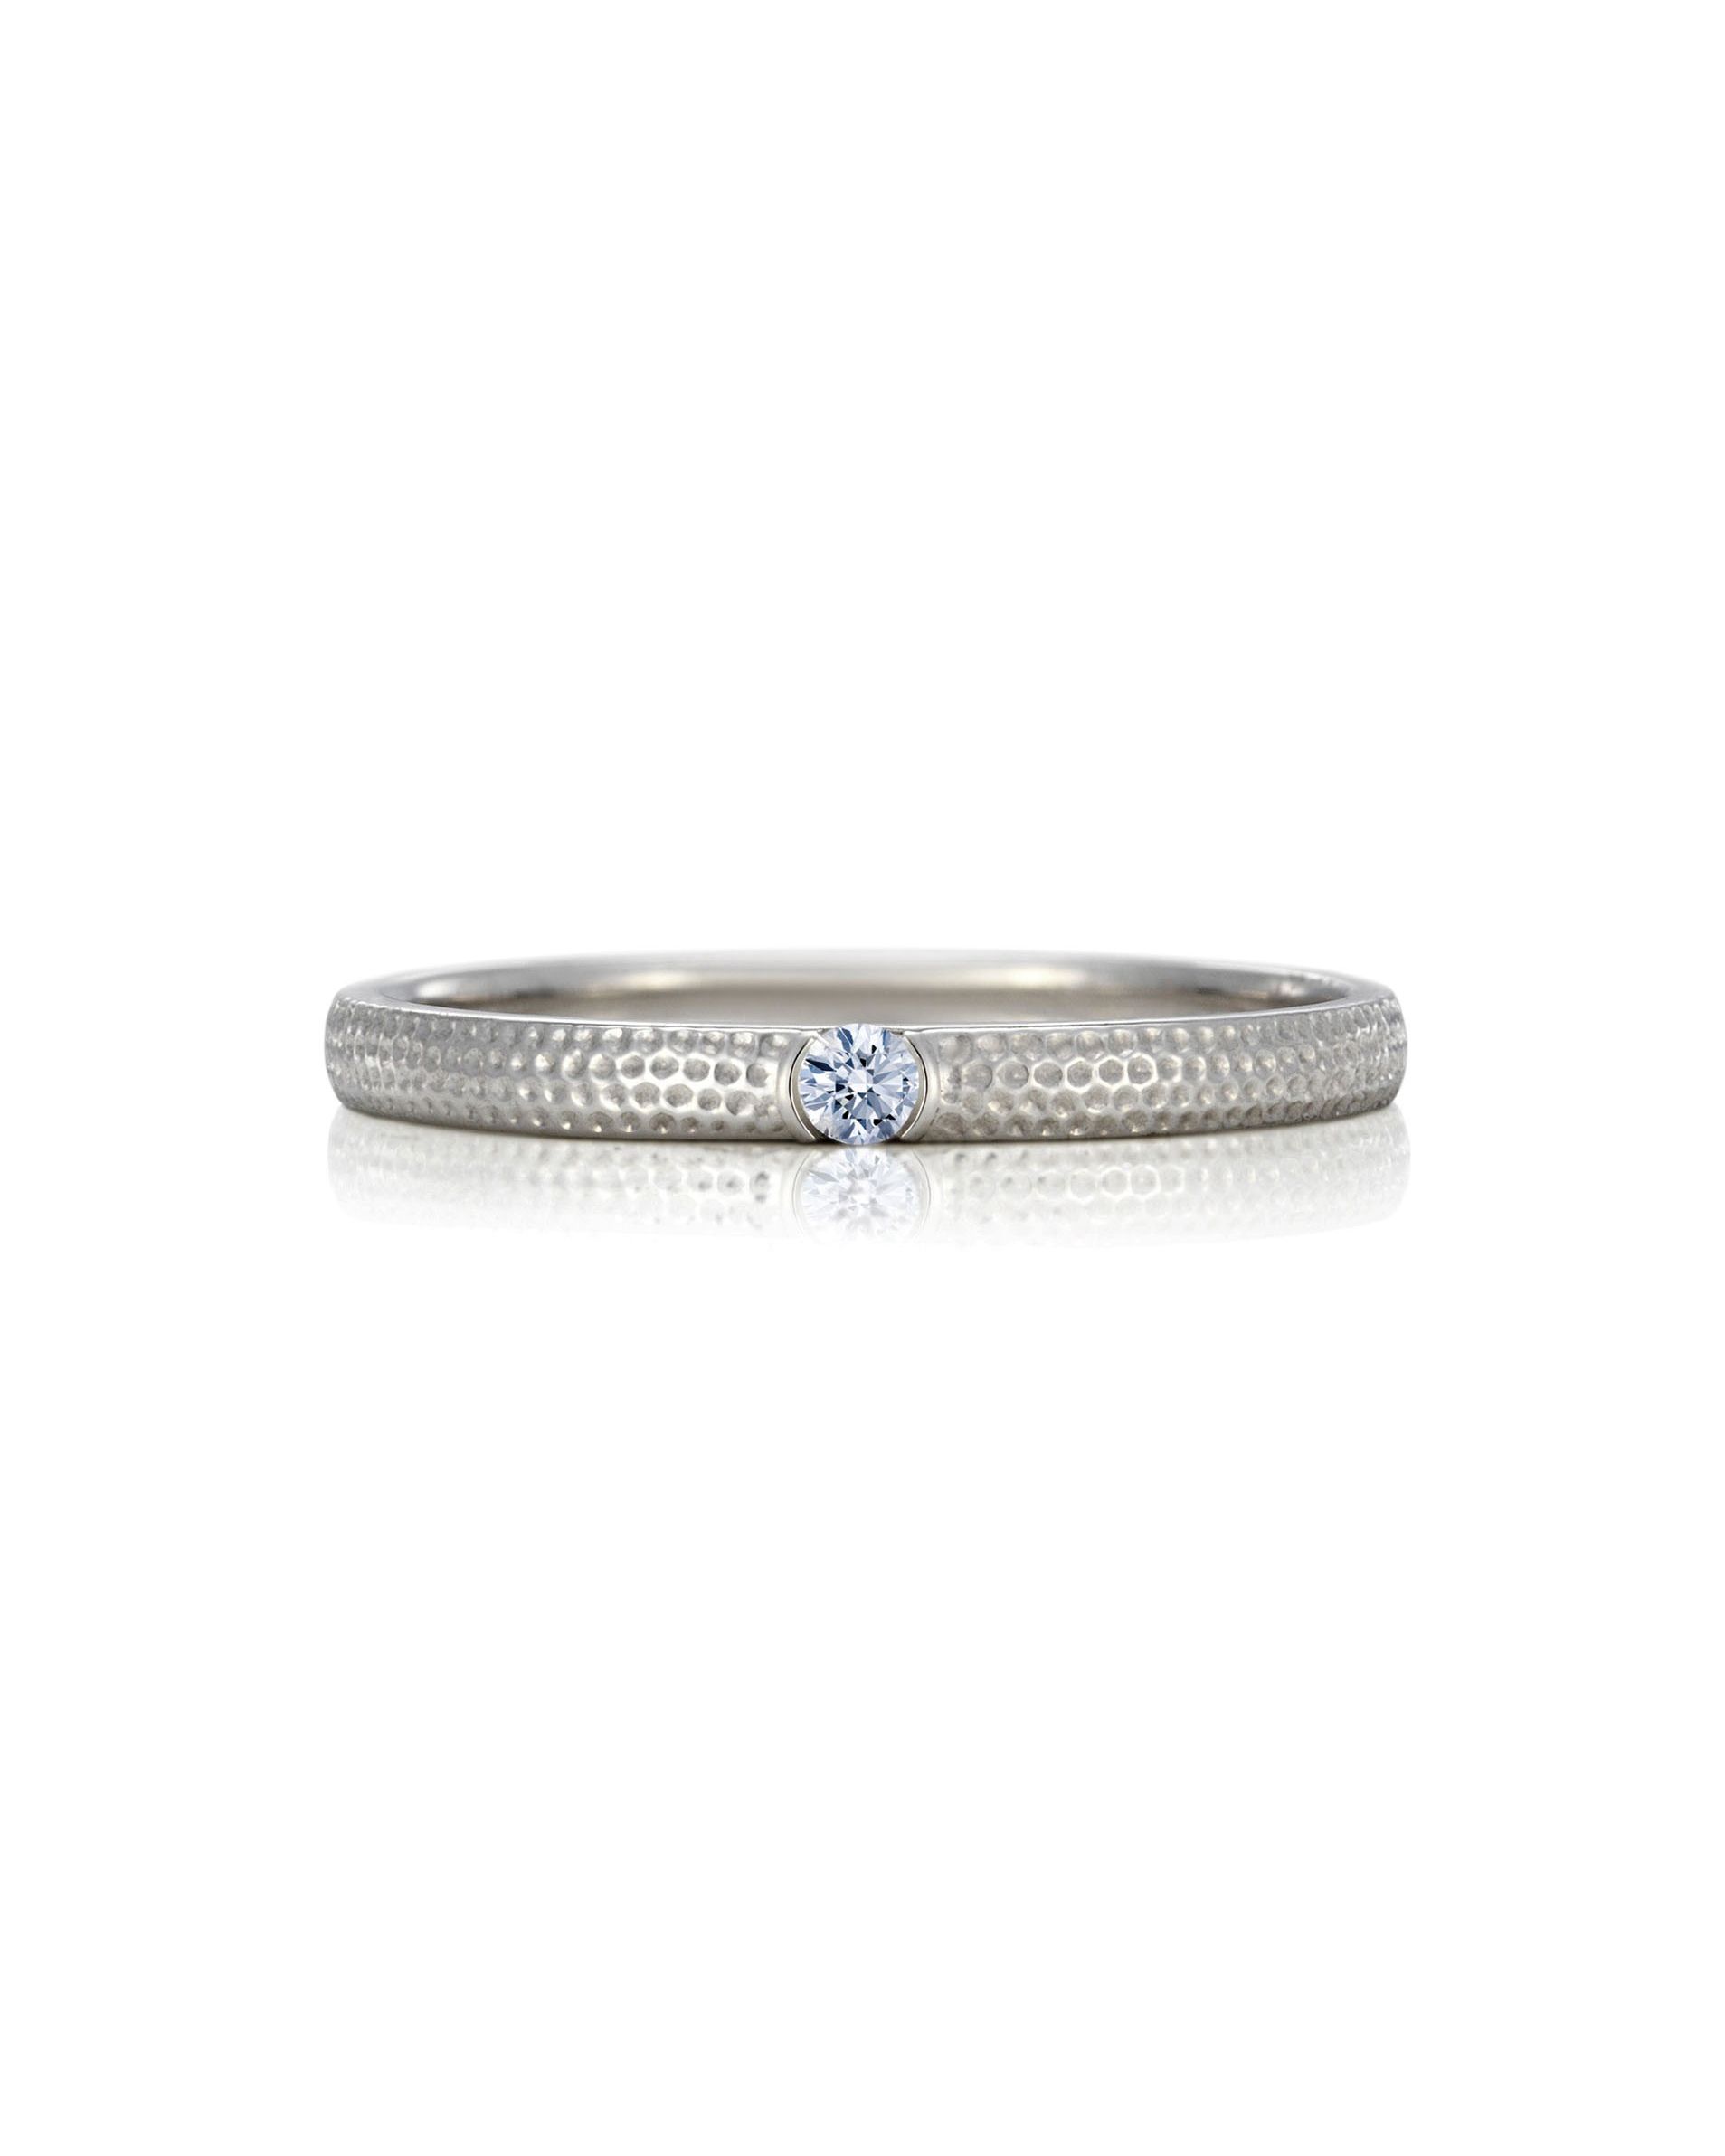 40 Unique Wedding Bands For The Groom | Martha Stewart Weddings With Regard To Most Recent Single Diamond Zalium Wedding Bands (View 9 of 25)